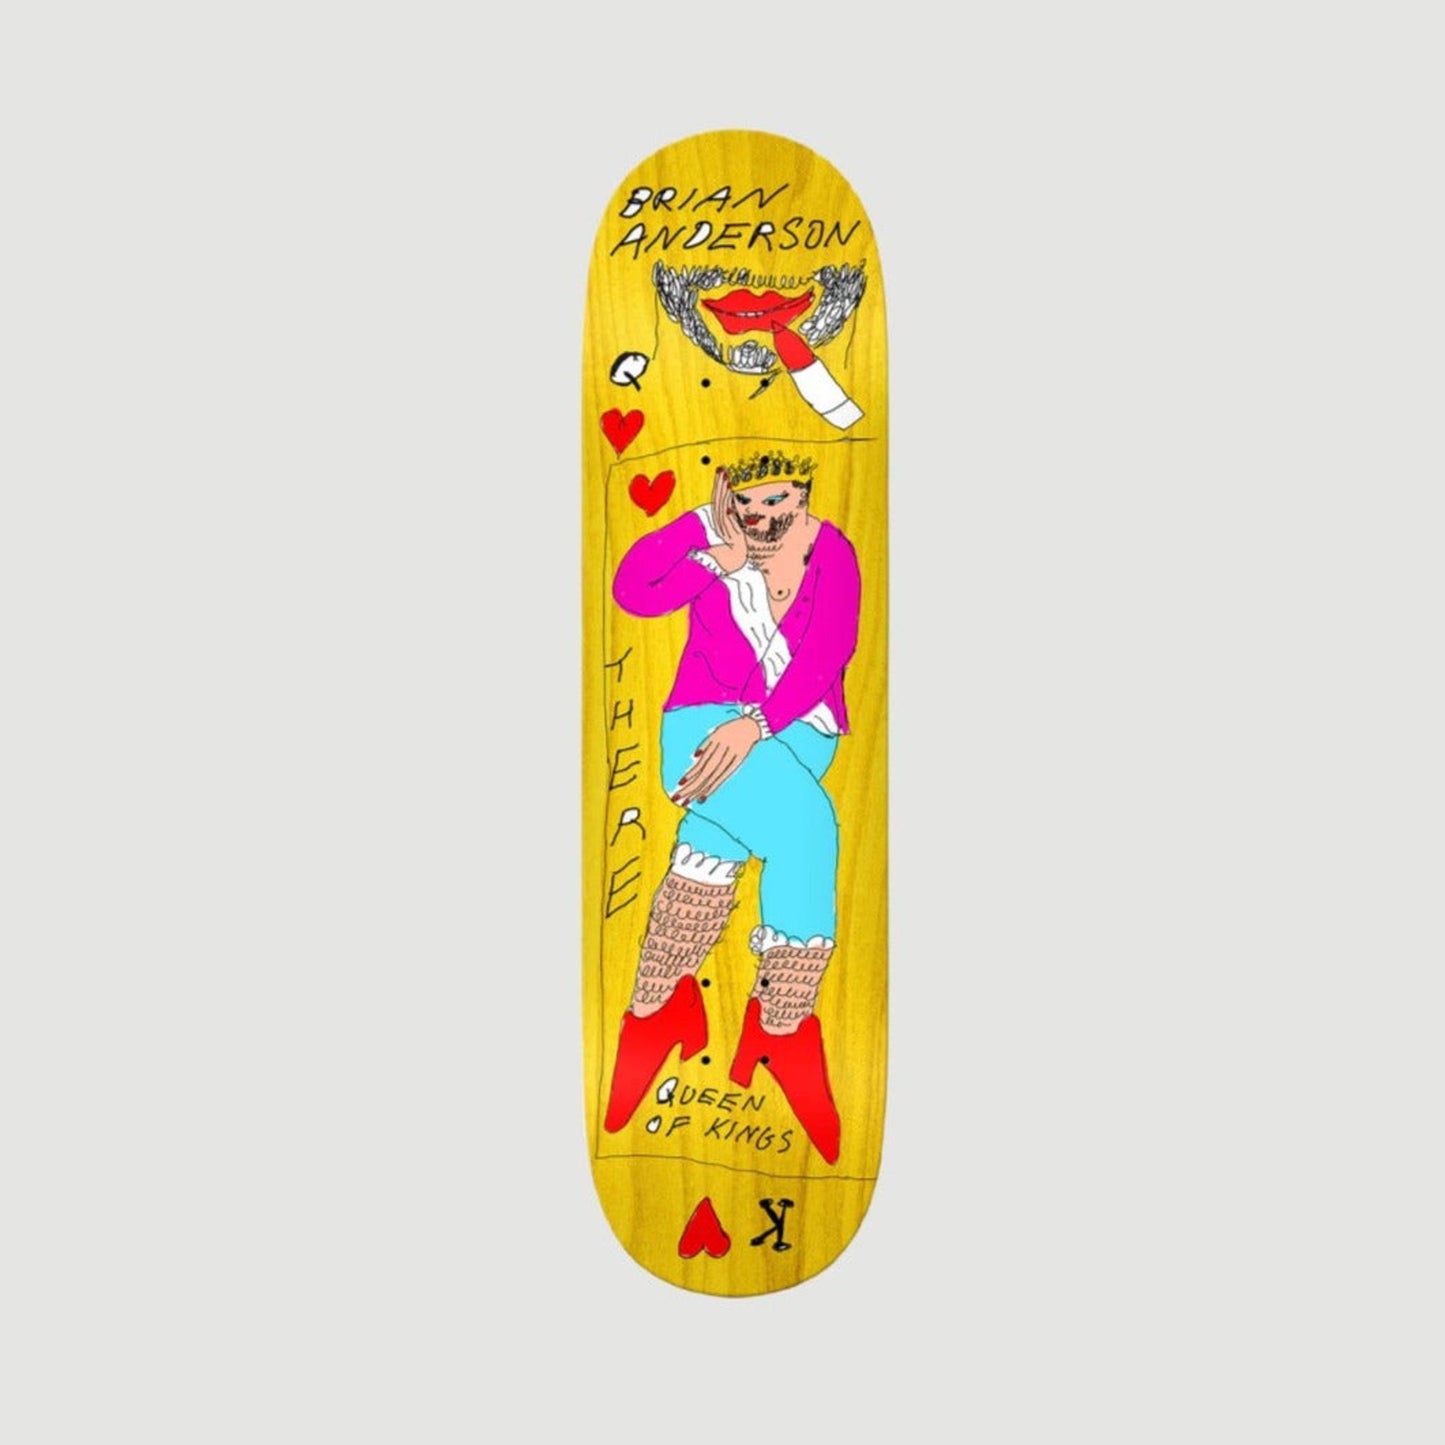 There Skateboards "Queen of Kings" Brian Anderson Guest Pro 8.5